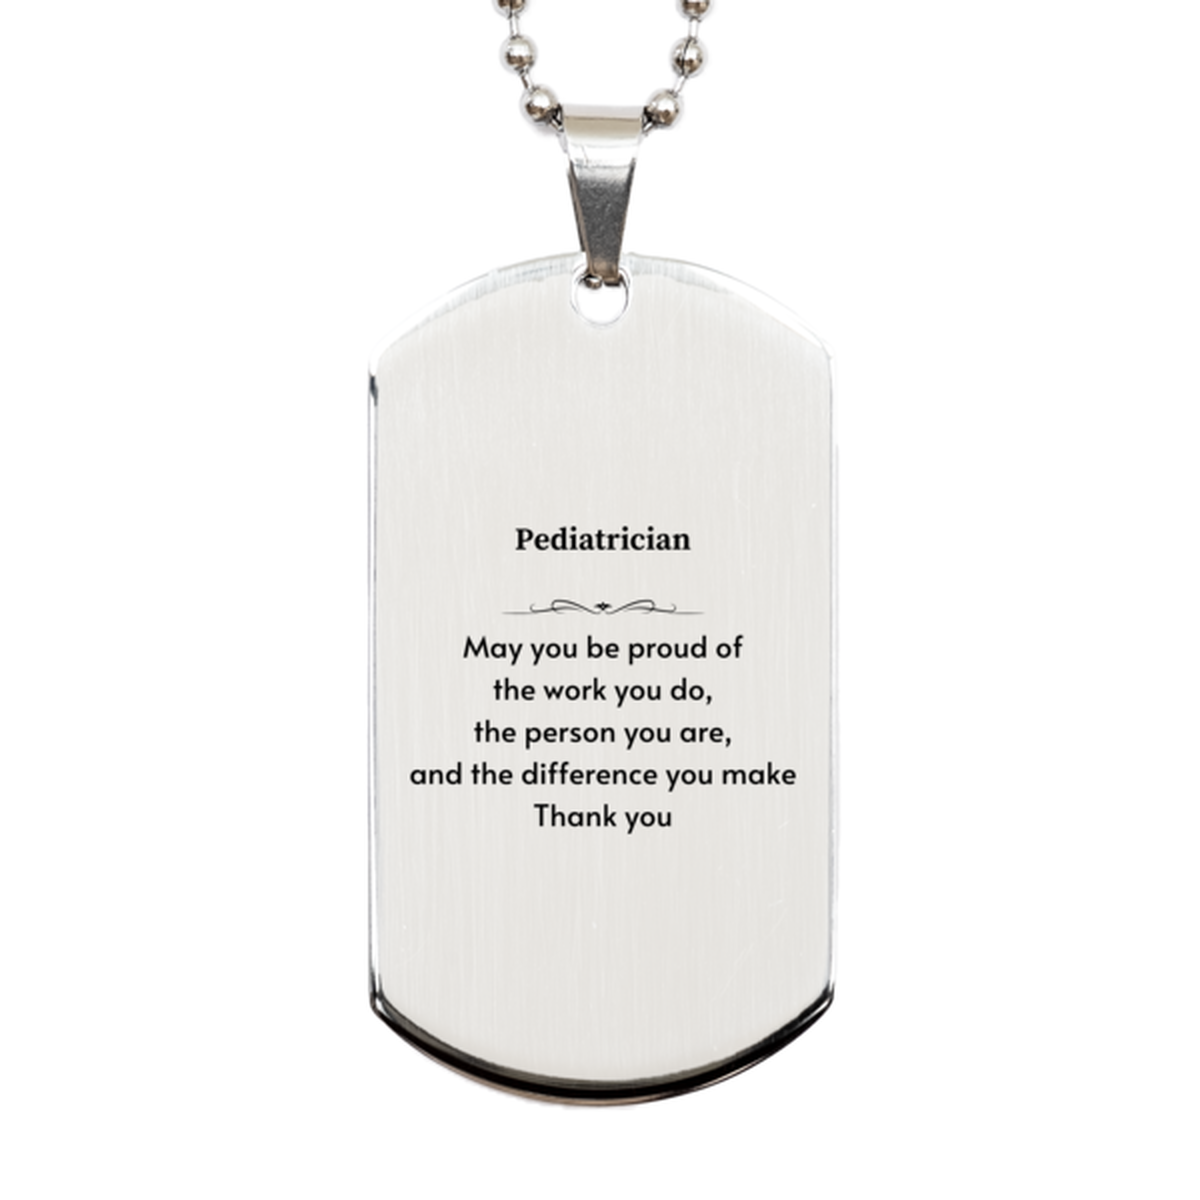 Heartwarming Silver Dog Tag Retirement Coworkers Gifts for Pediatrician, Pediatrician May You be proud of the work you do, the person you are Gifts for Boss Men Women Friends